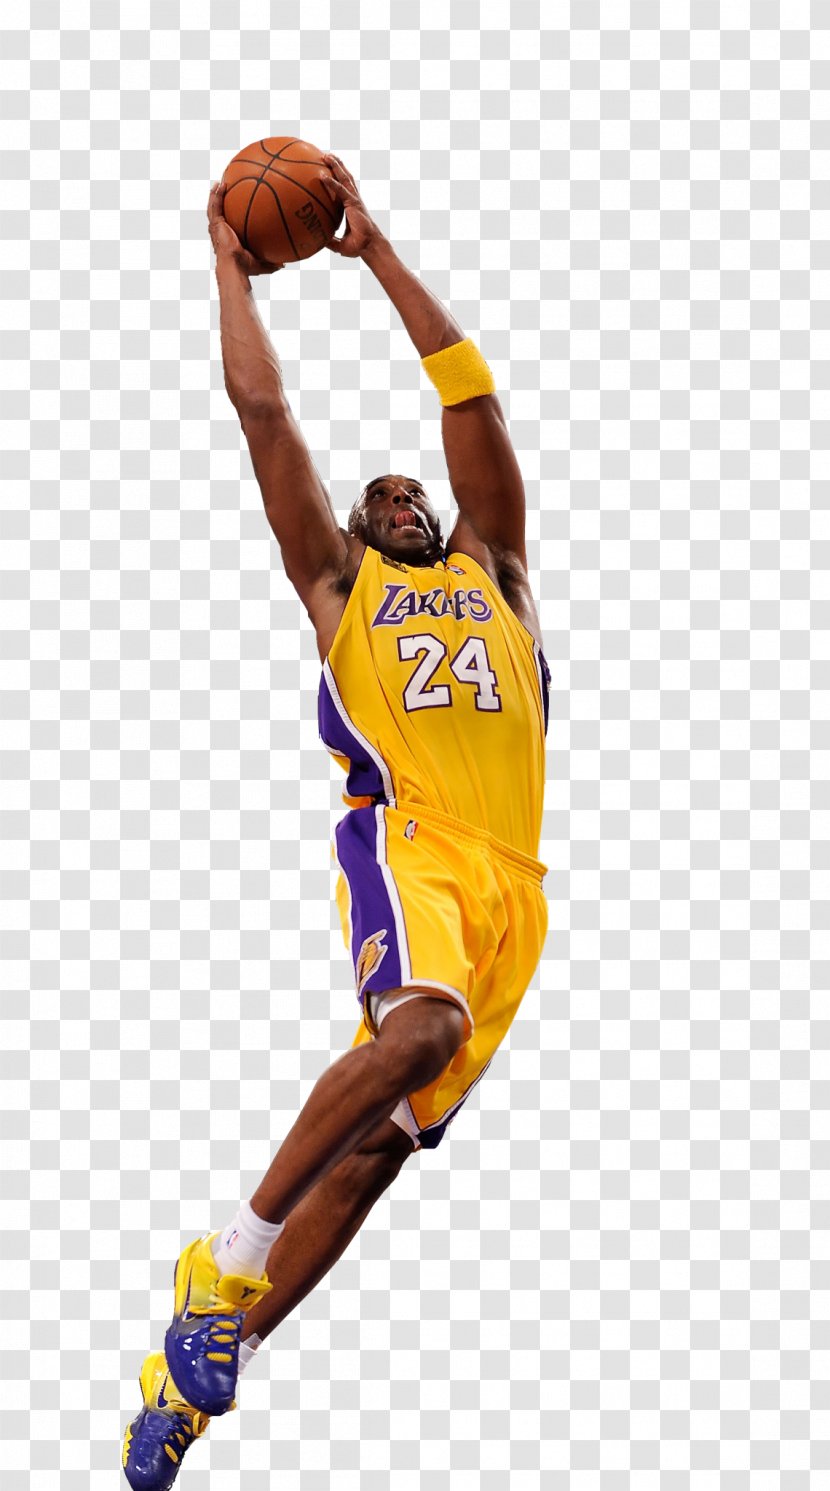 Nike Poster Los Angeles Lakers Just Do It - Team Sport - Kobe Bryant Image Transparent PNG